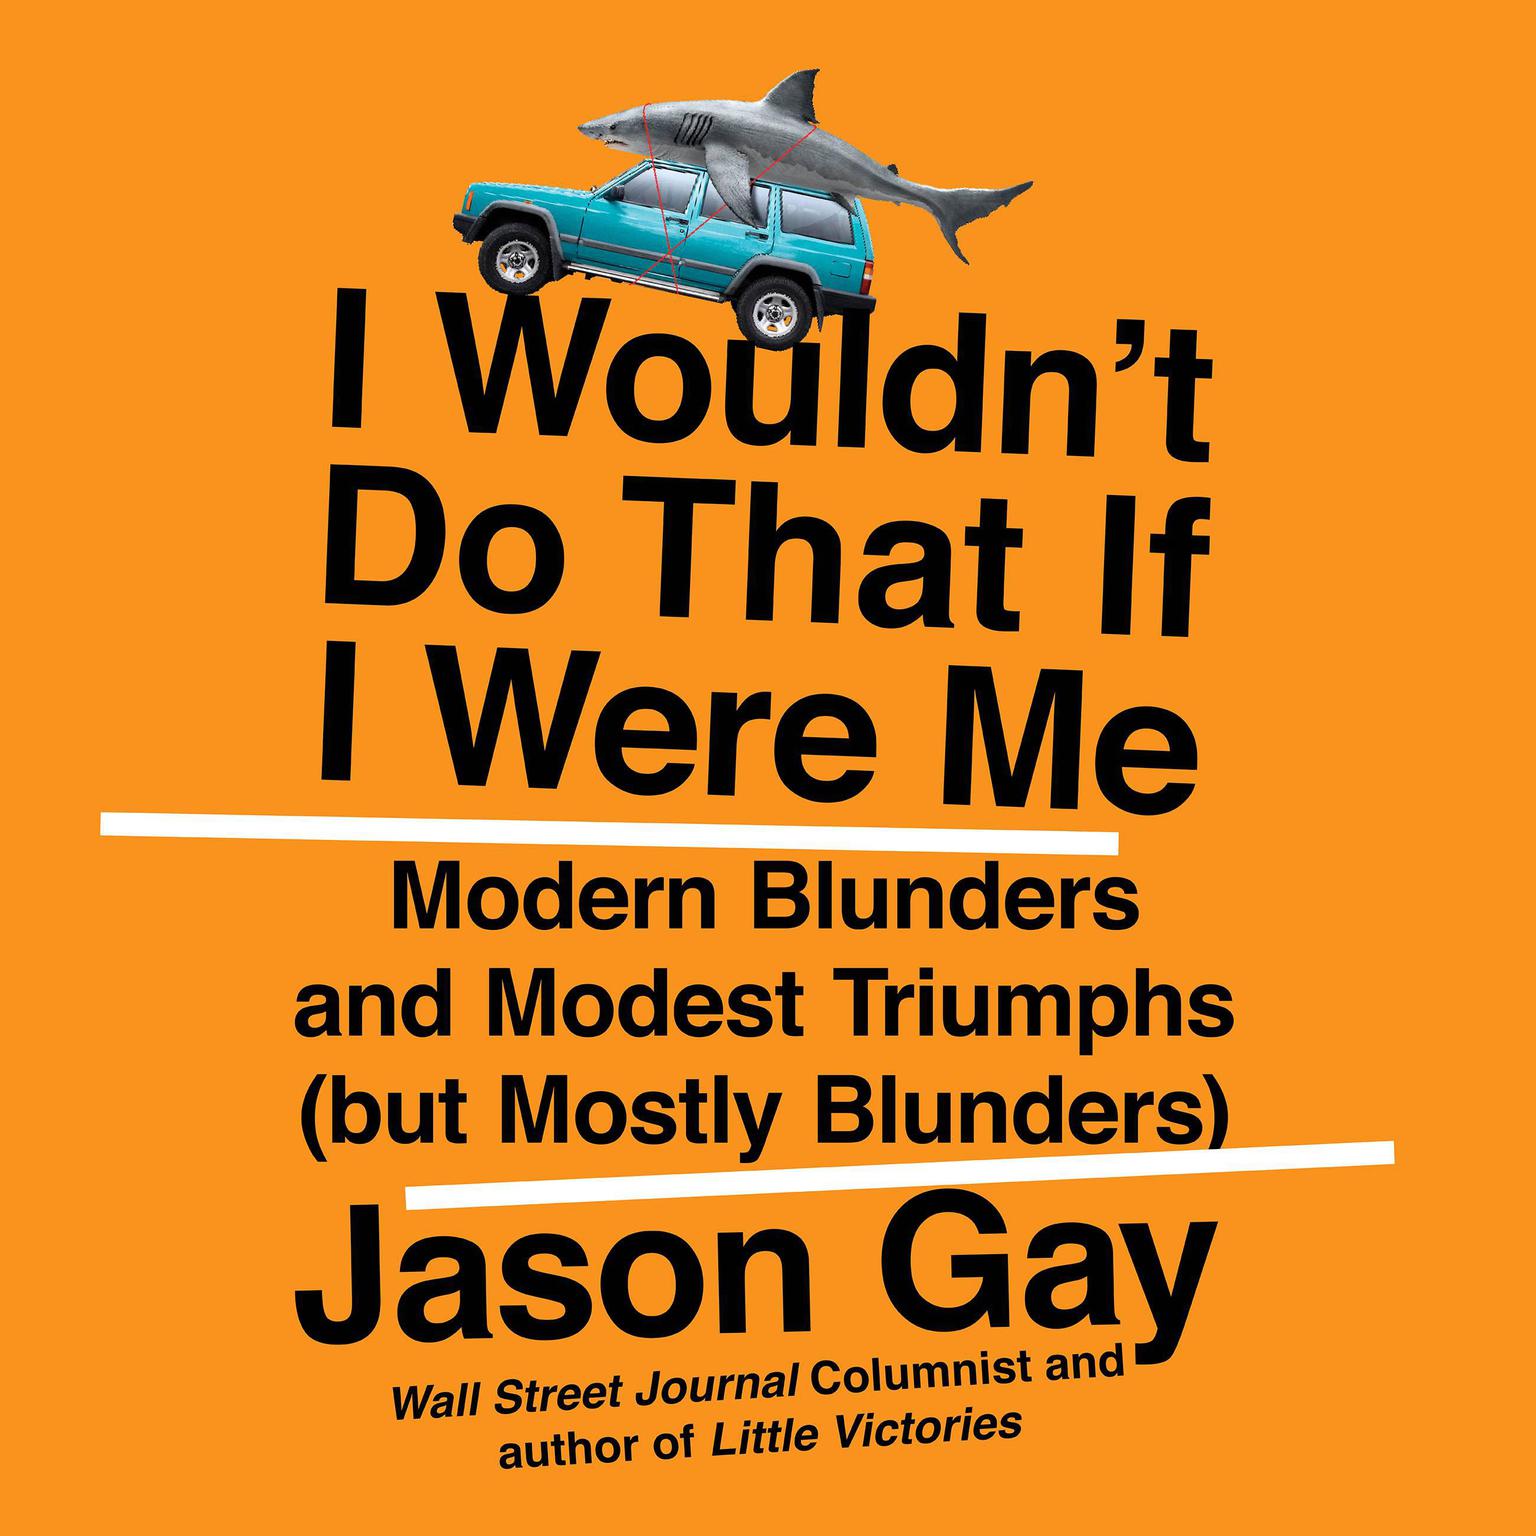 I Wouldnt Do That If I Were Me: Modern Blunders and Modest Triumphs (but Mostly Blunders) Audiobook, by Jason Gay